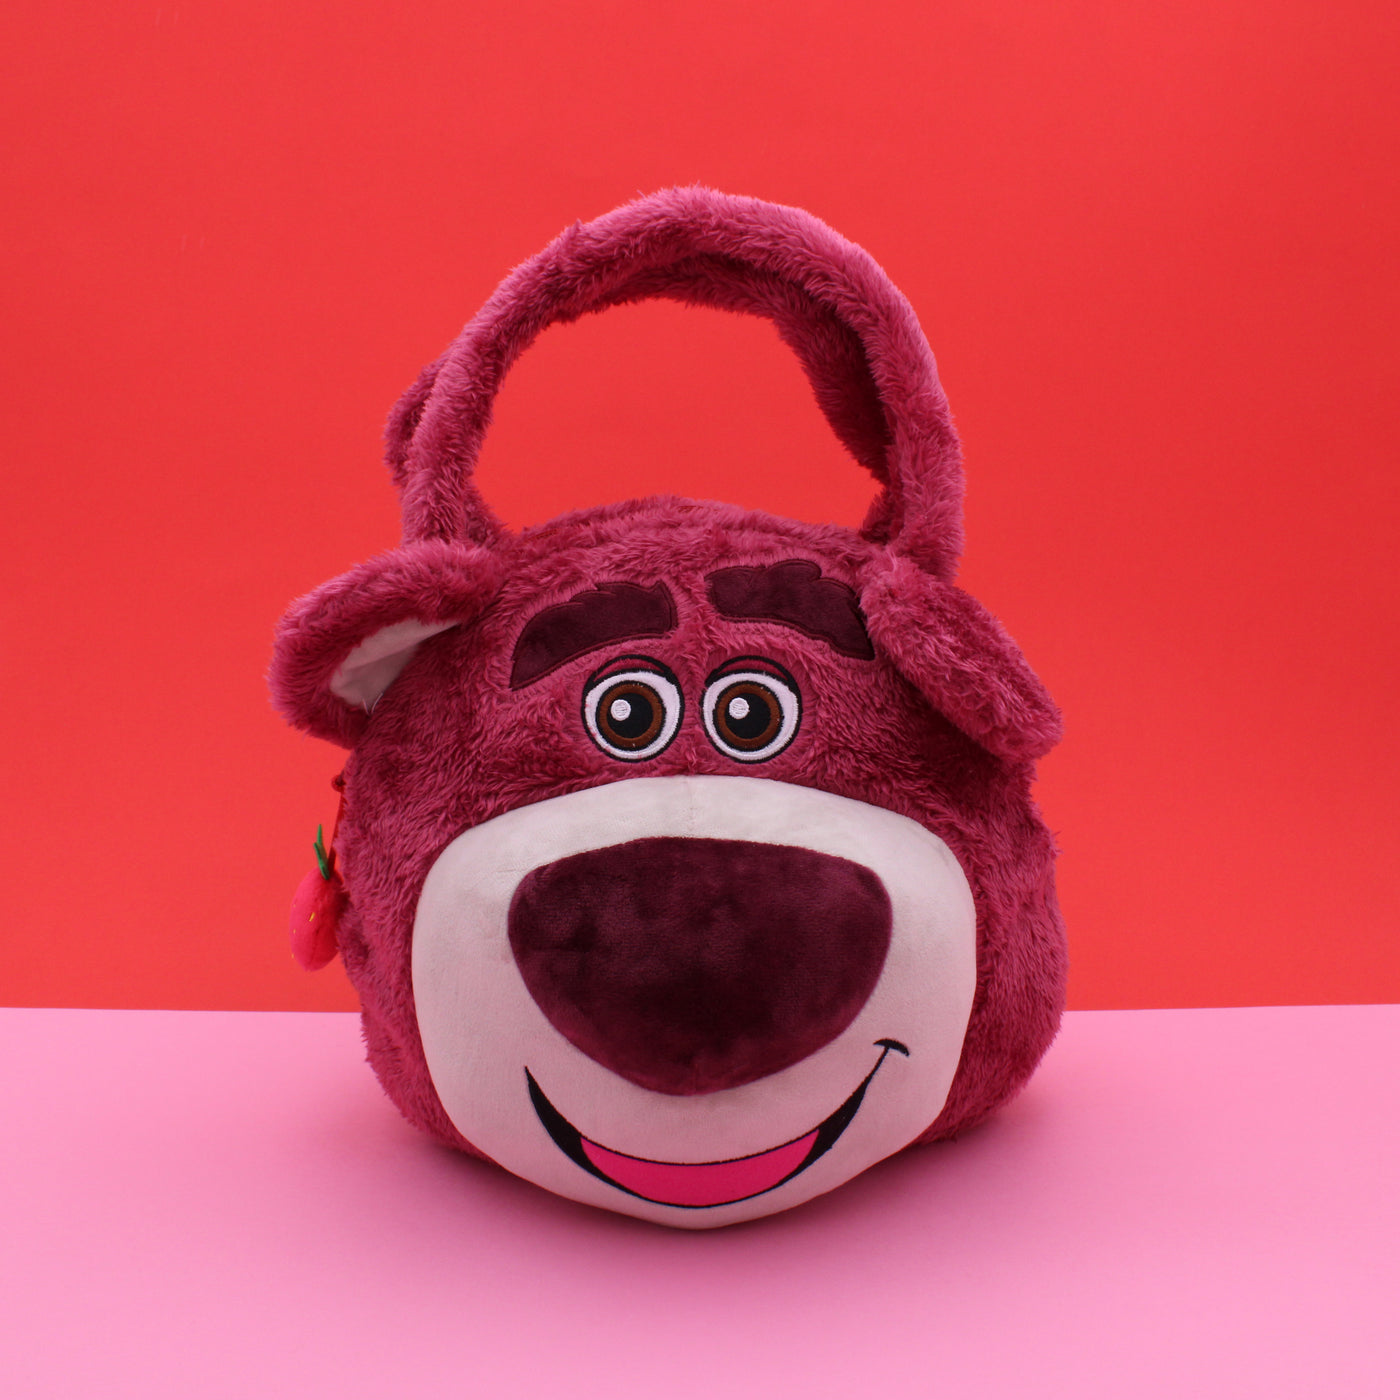 Sac bandoulière Lotso - Toy Story Collection